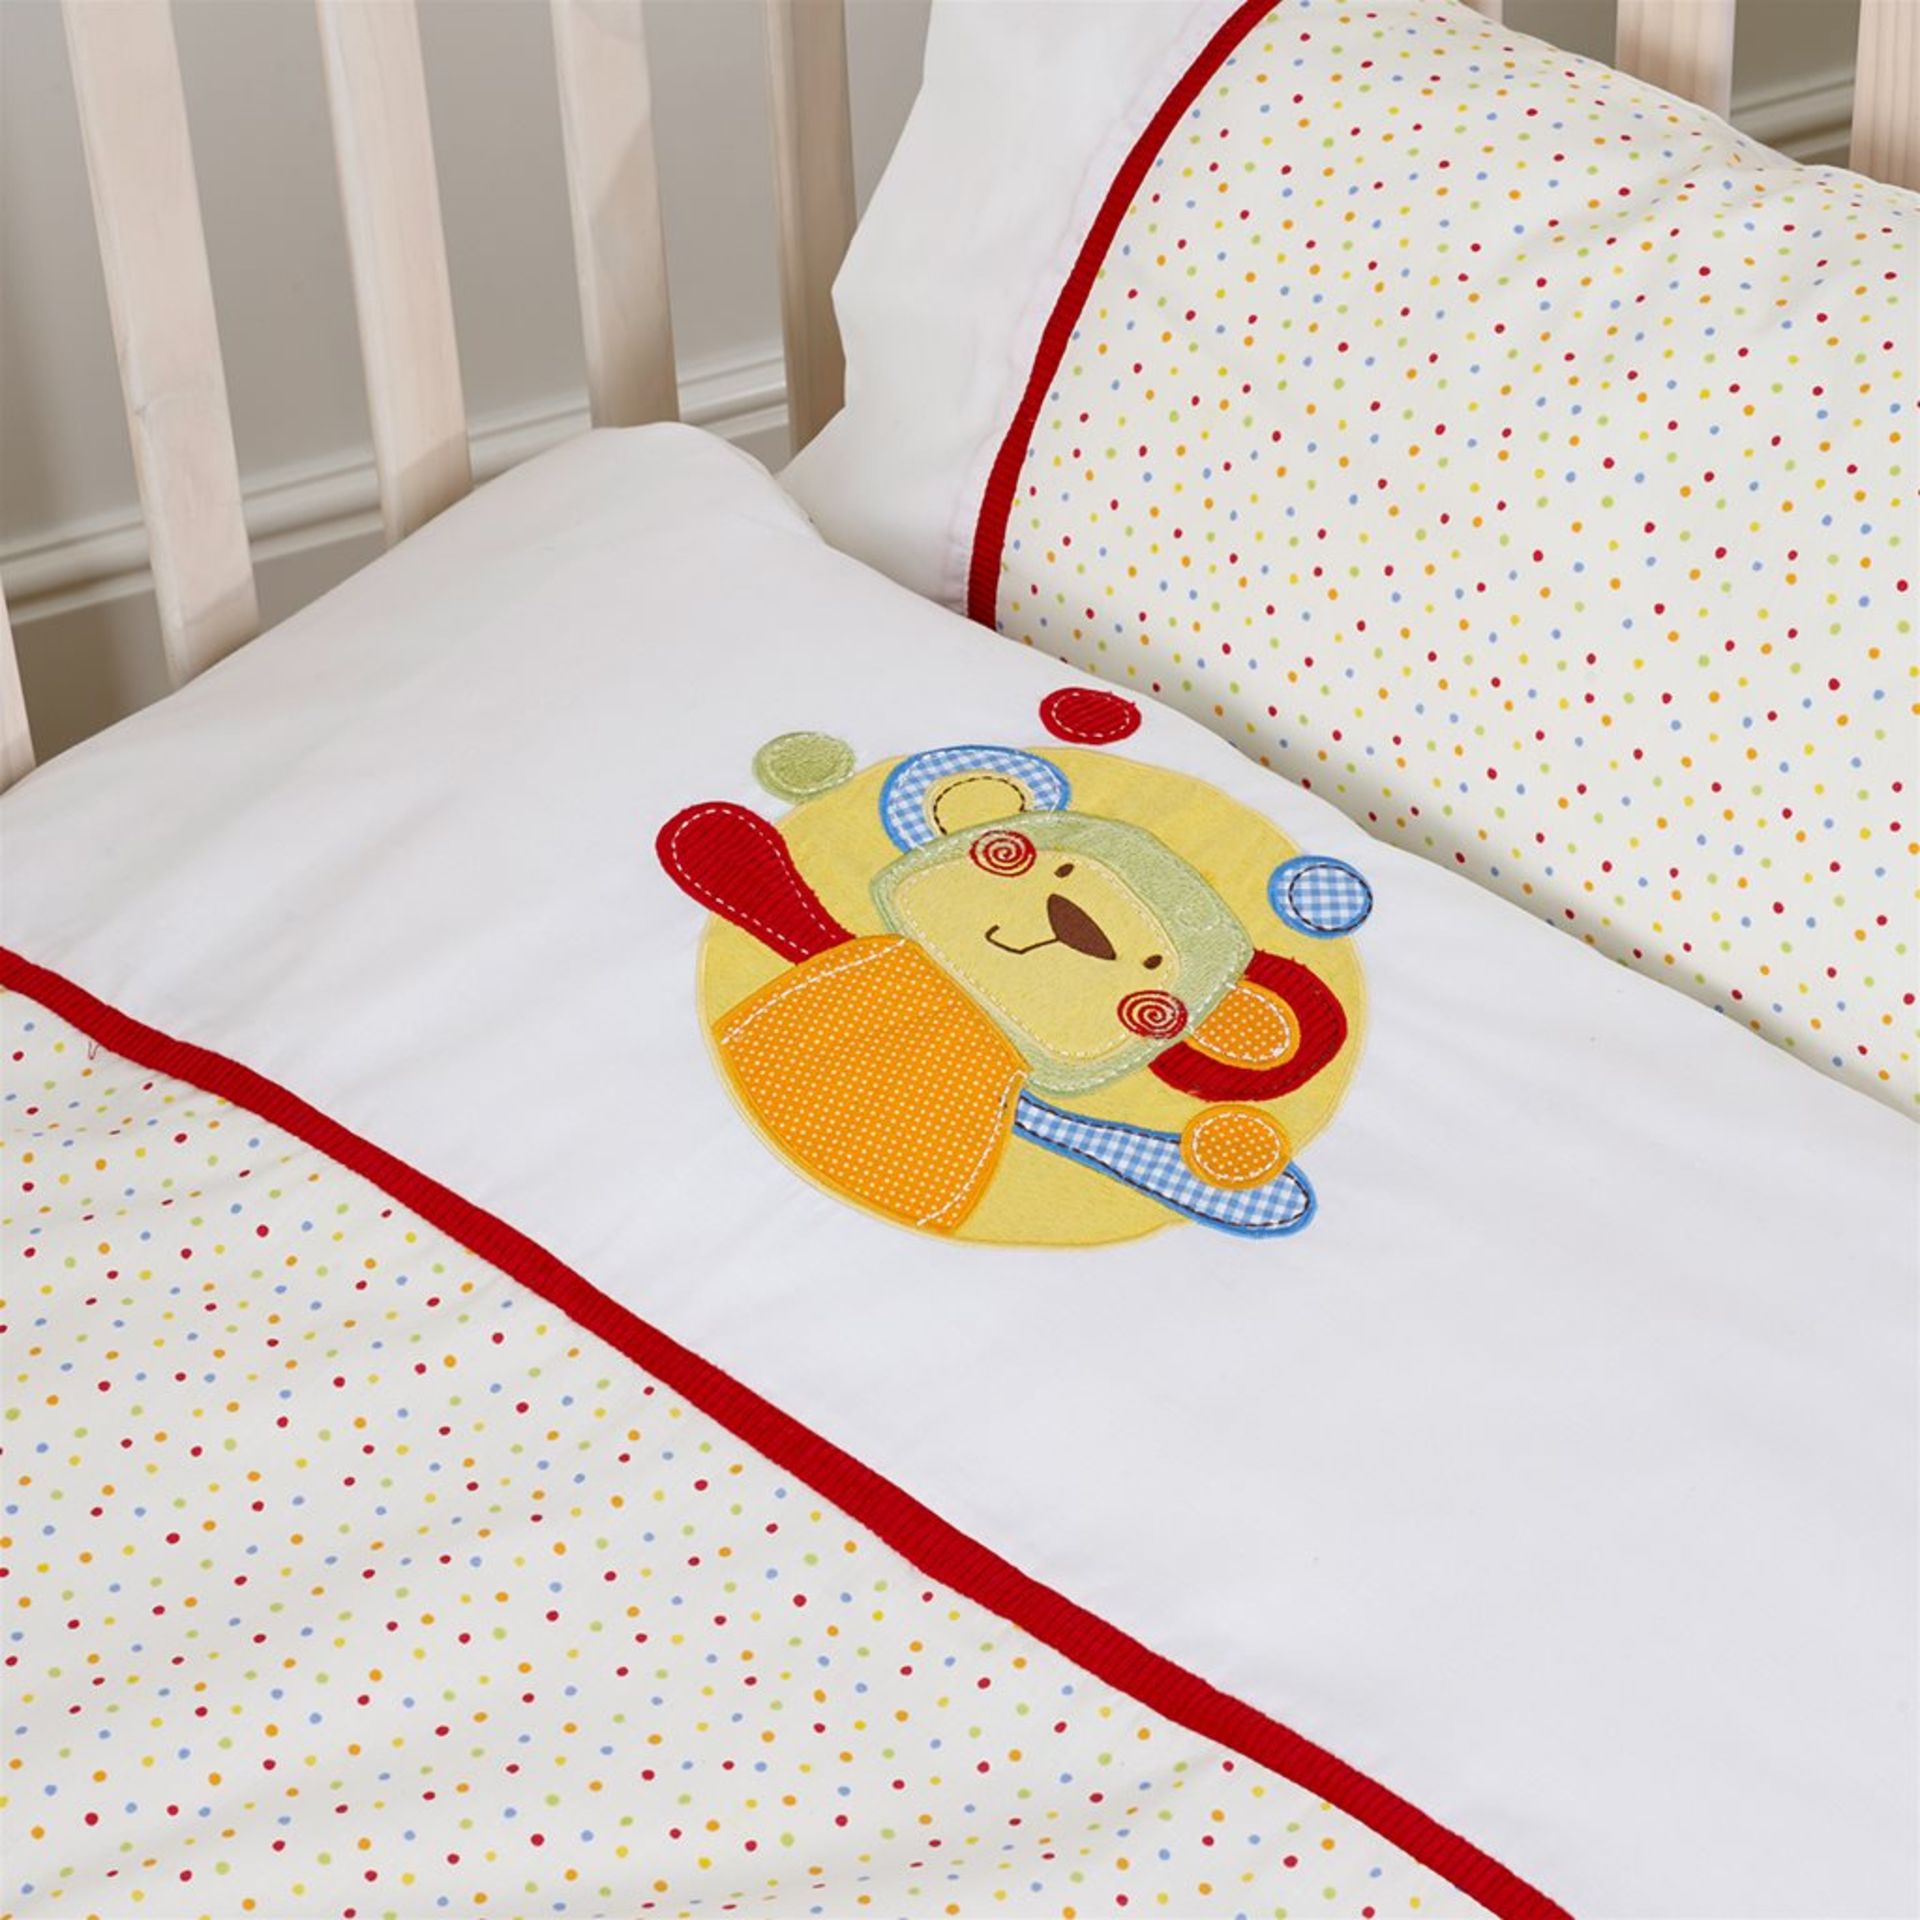 50 sets Jolly Jamboree Toddler/Cotbed Duvet Cover with Pillowcase (150 x 120cm) - Image 2 of 2